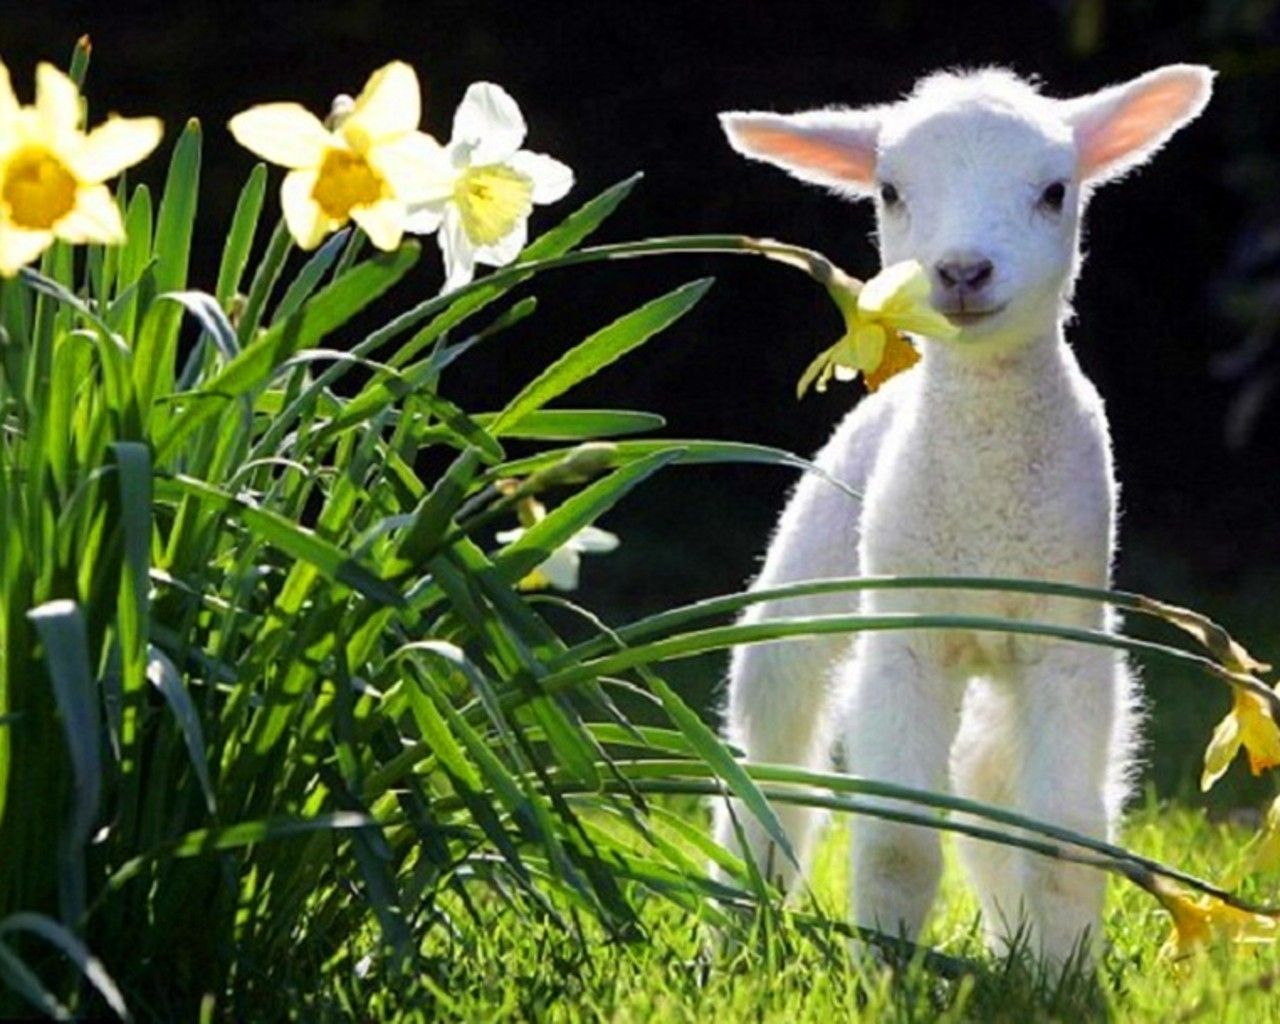 Download Wallpaper, Download flowers animals grass spring lamb daffodils lambs white flowers baby animals 1280x1024. Animals, Cute animals, Cute animal picture